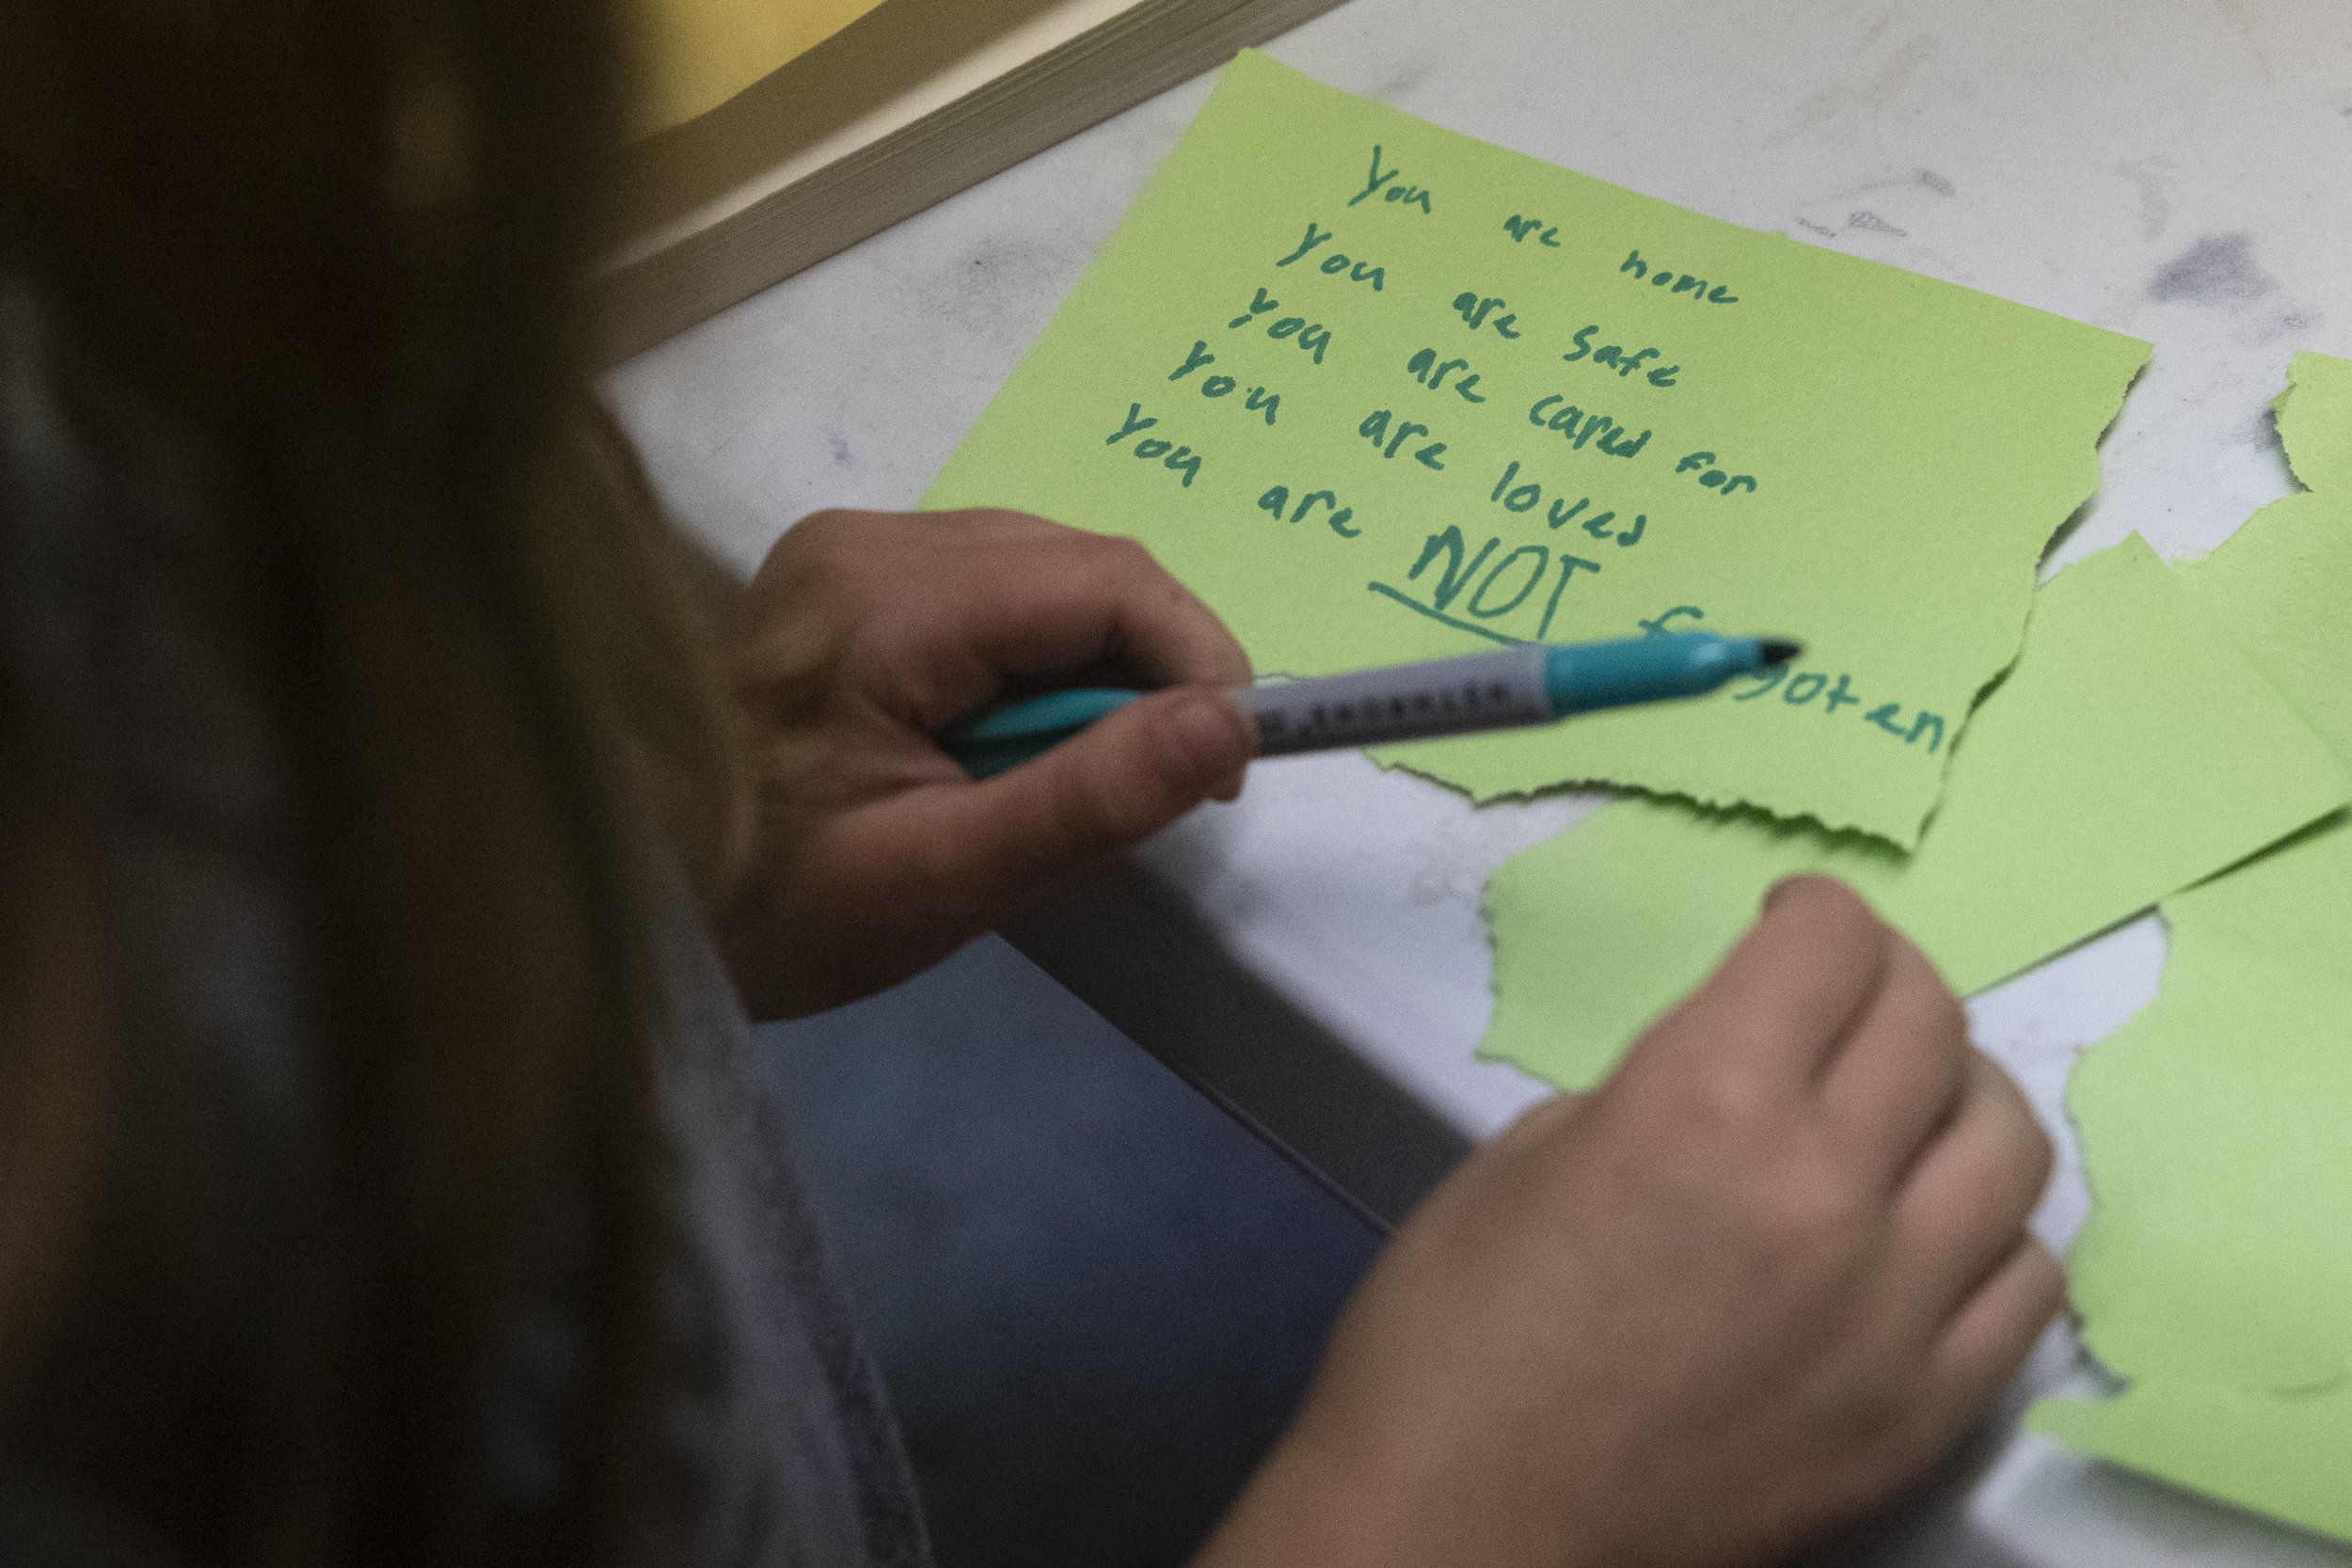  Eloise (she/her) writes a letter to herself on the last day of camp. The letter reads: “You are home, You are safe, You are cared for, You are loved, You are NOT forgotten.”  